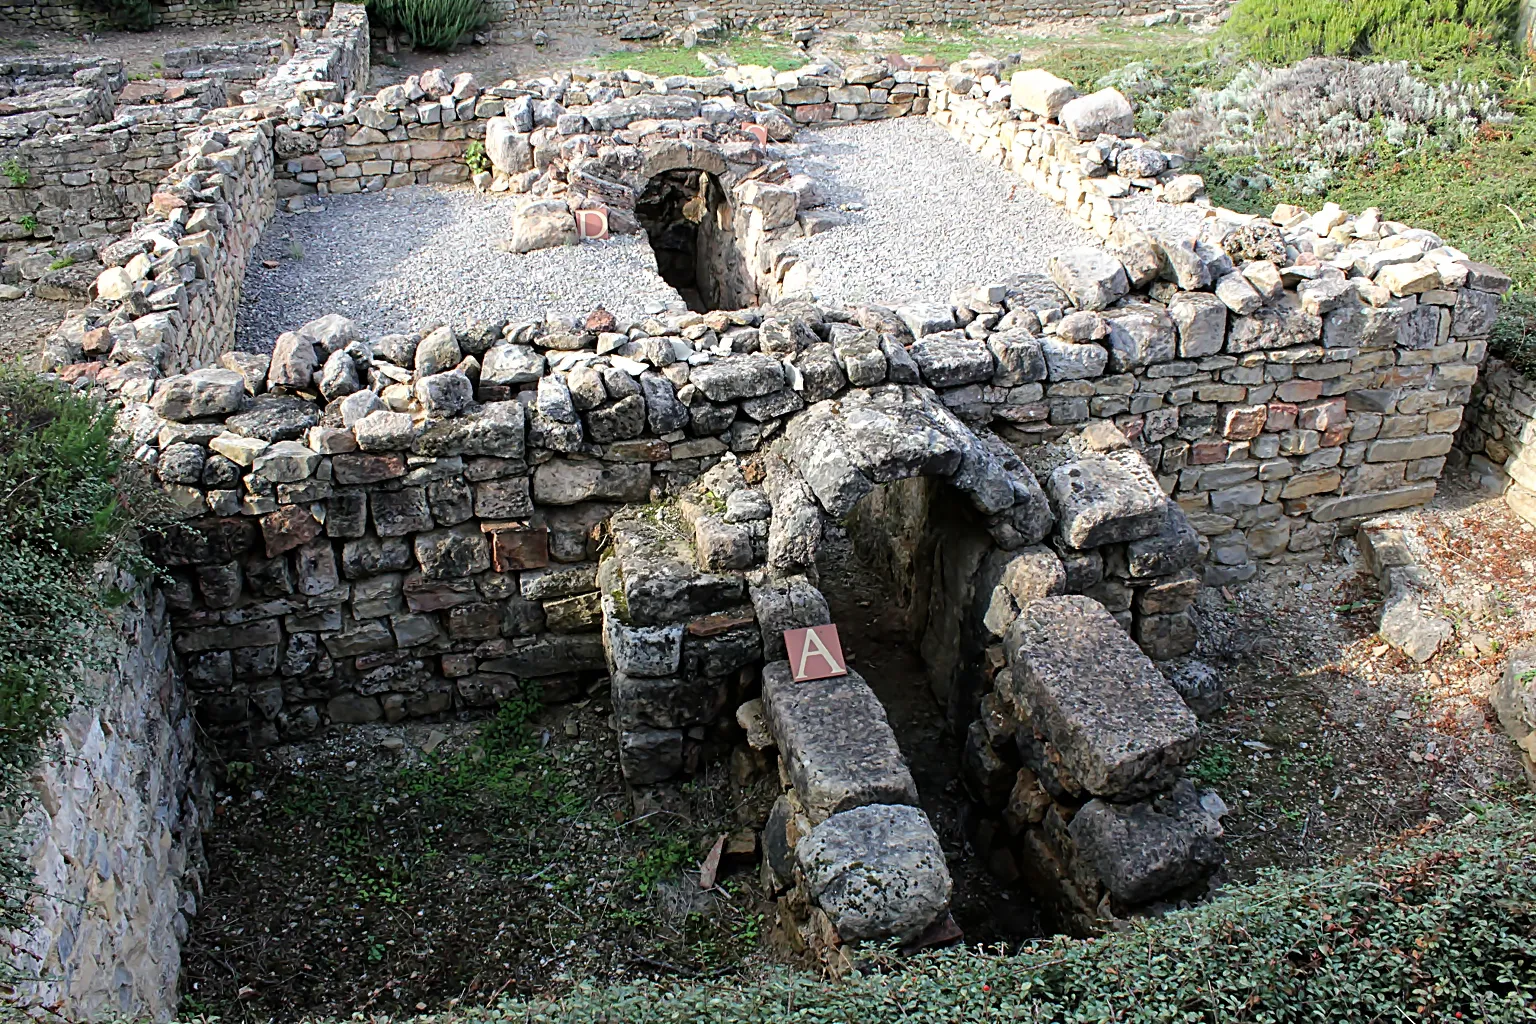 Photo showing: In this very large oven, the potters of La Graufesenque could cook up to 40 000 vases (terra sigillata, 1050°C during 3 to 4 days). Largest ceramics center of antiquity, La Graufesenque dispatched its production in all the Romain Empire.